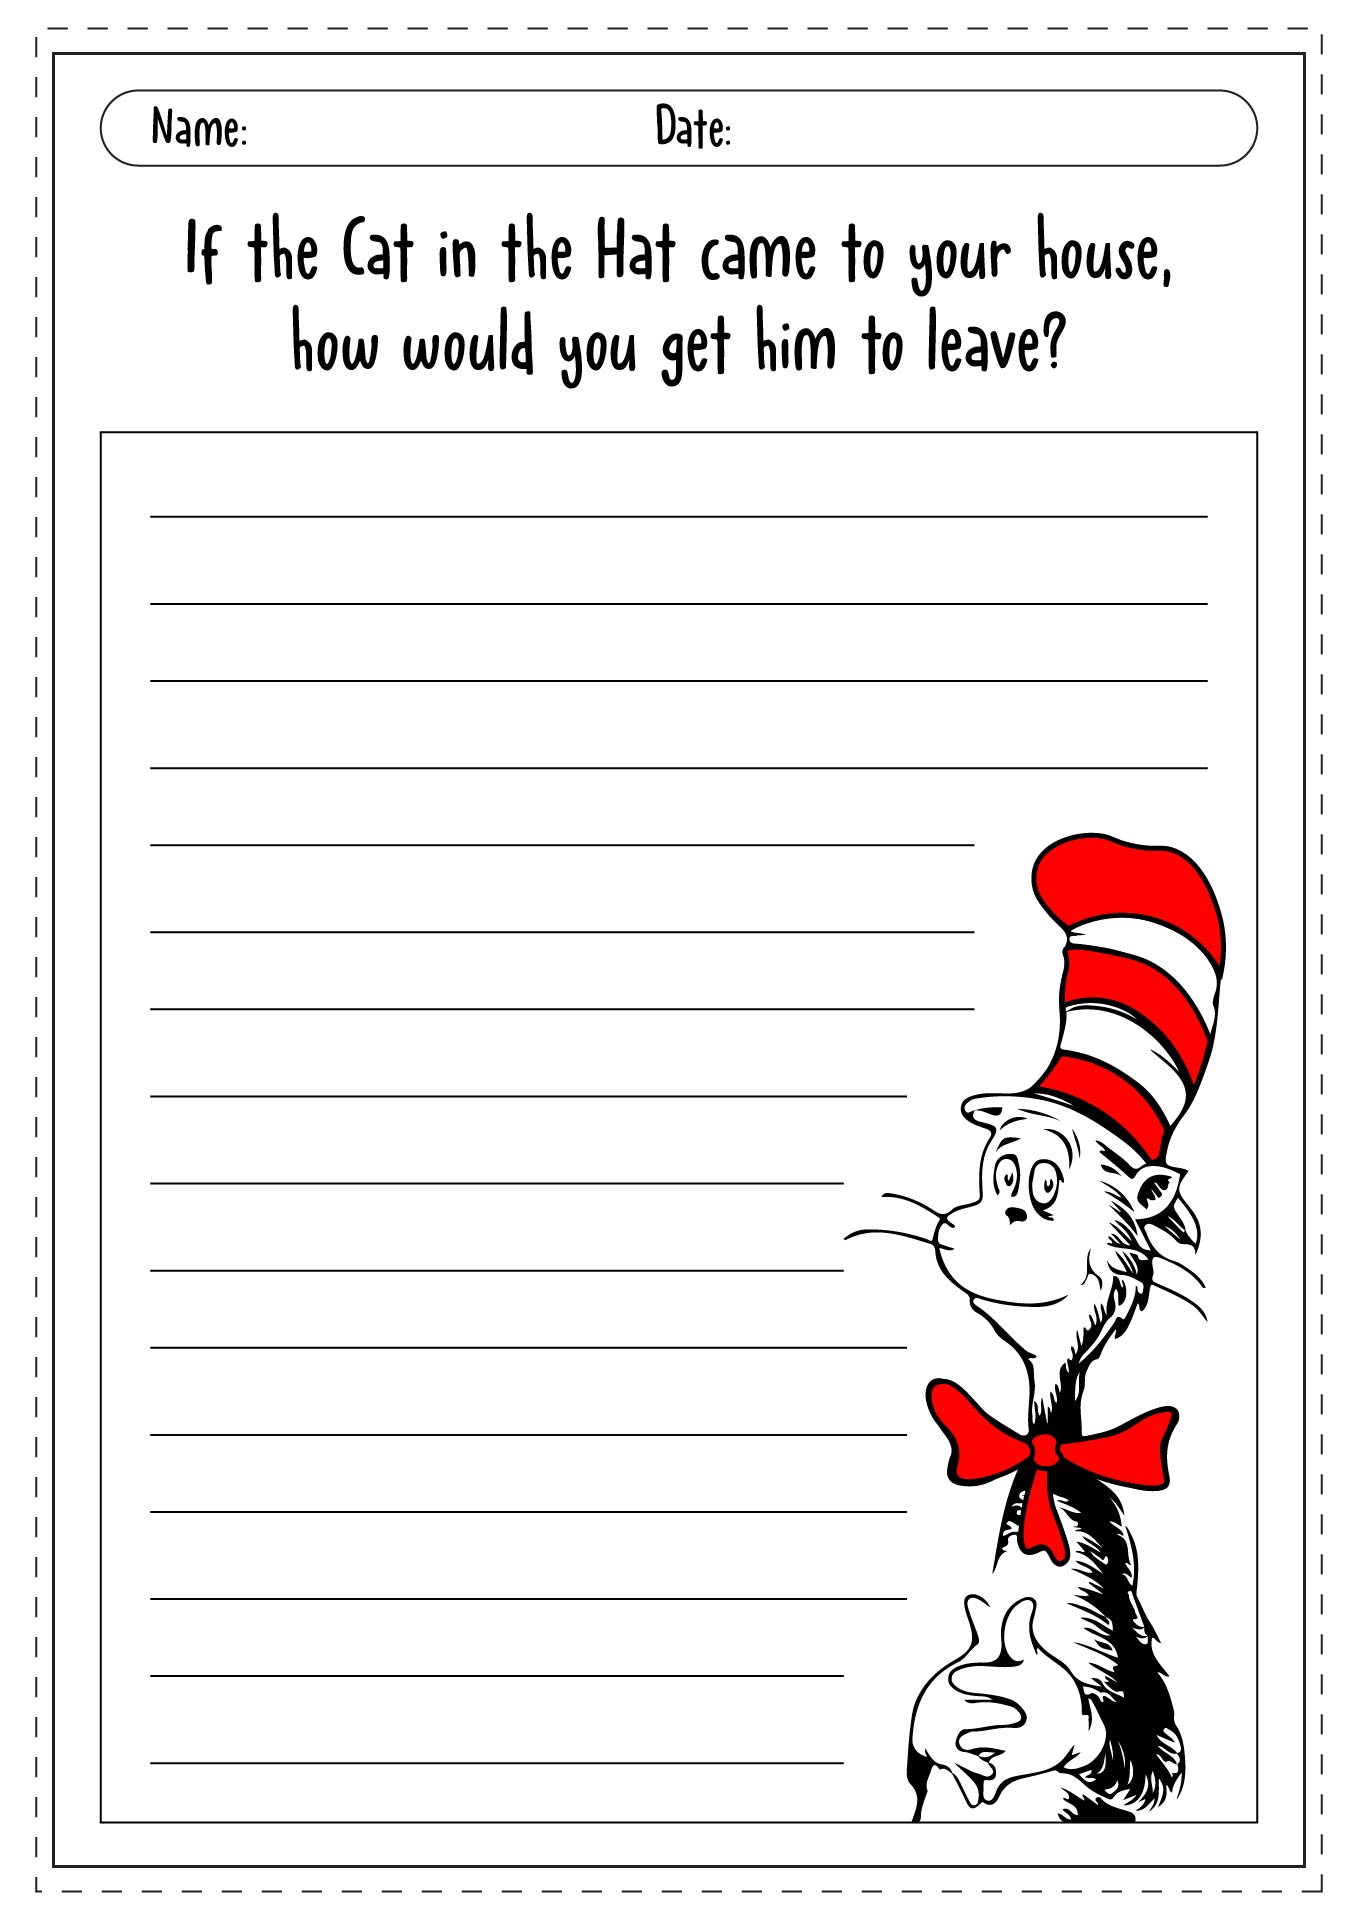 Cat in the Hat Activity Worksheets Image